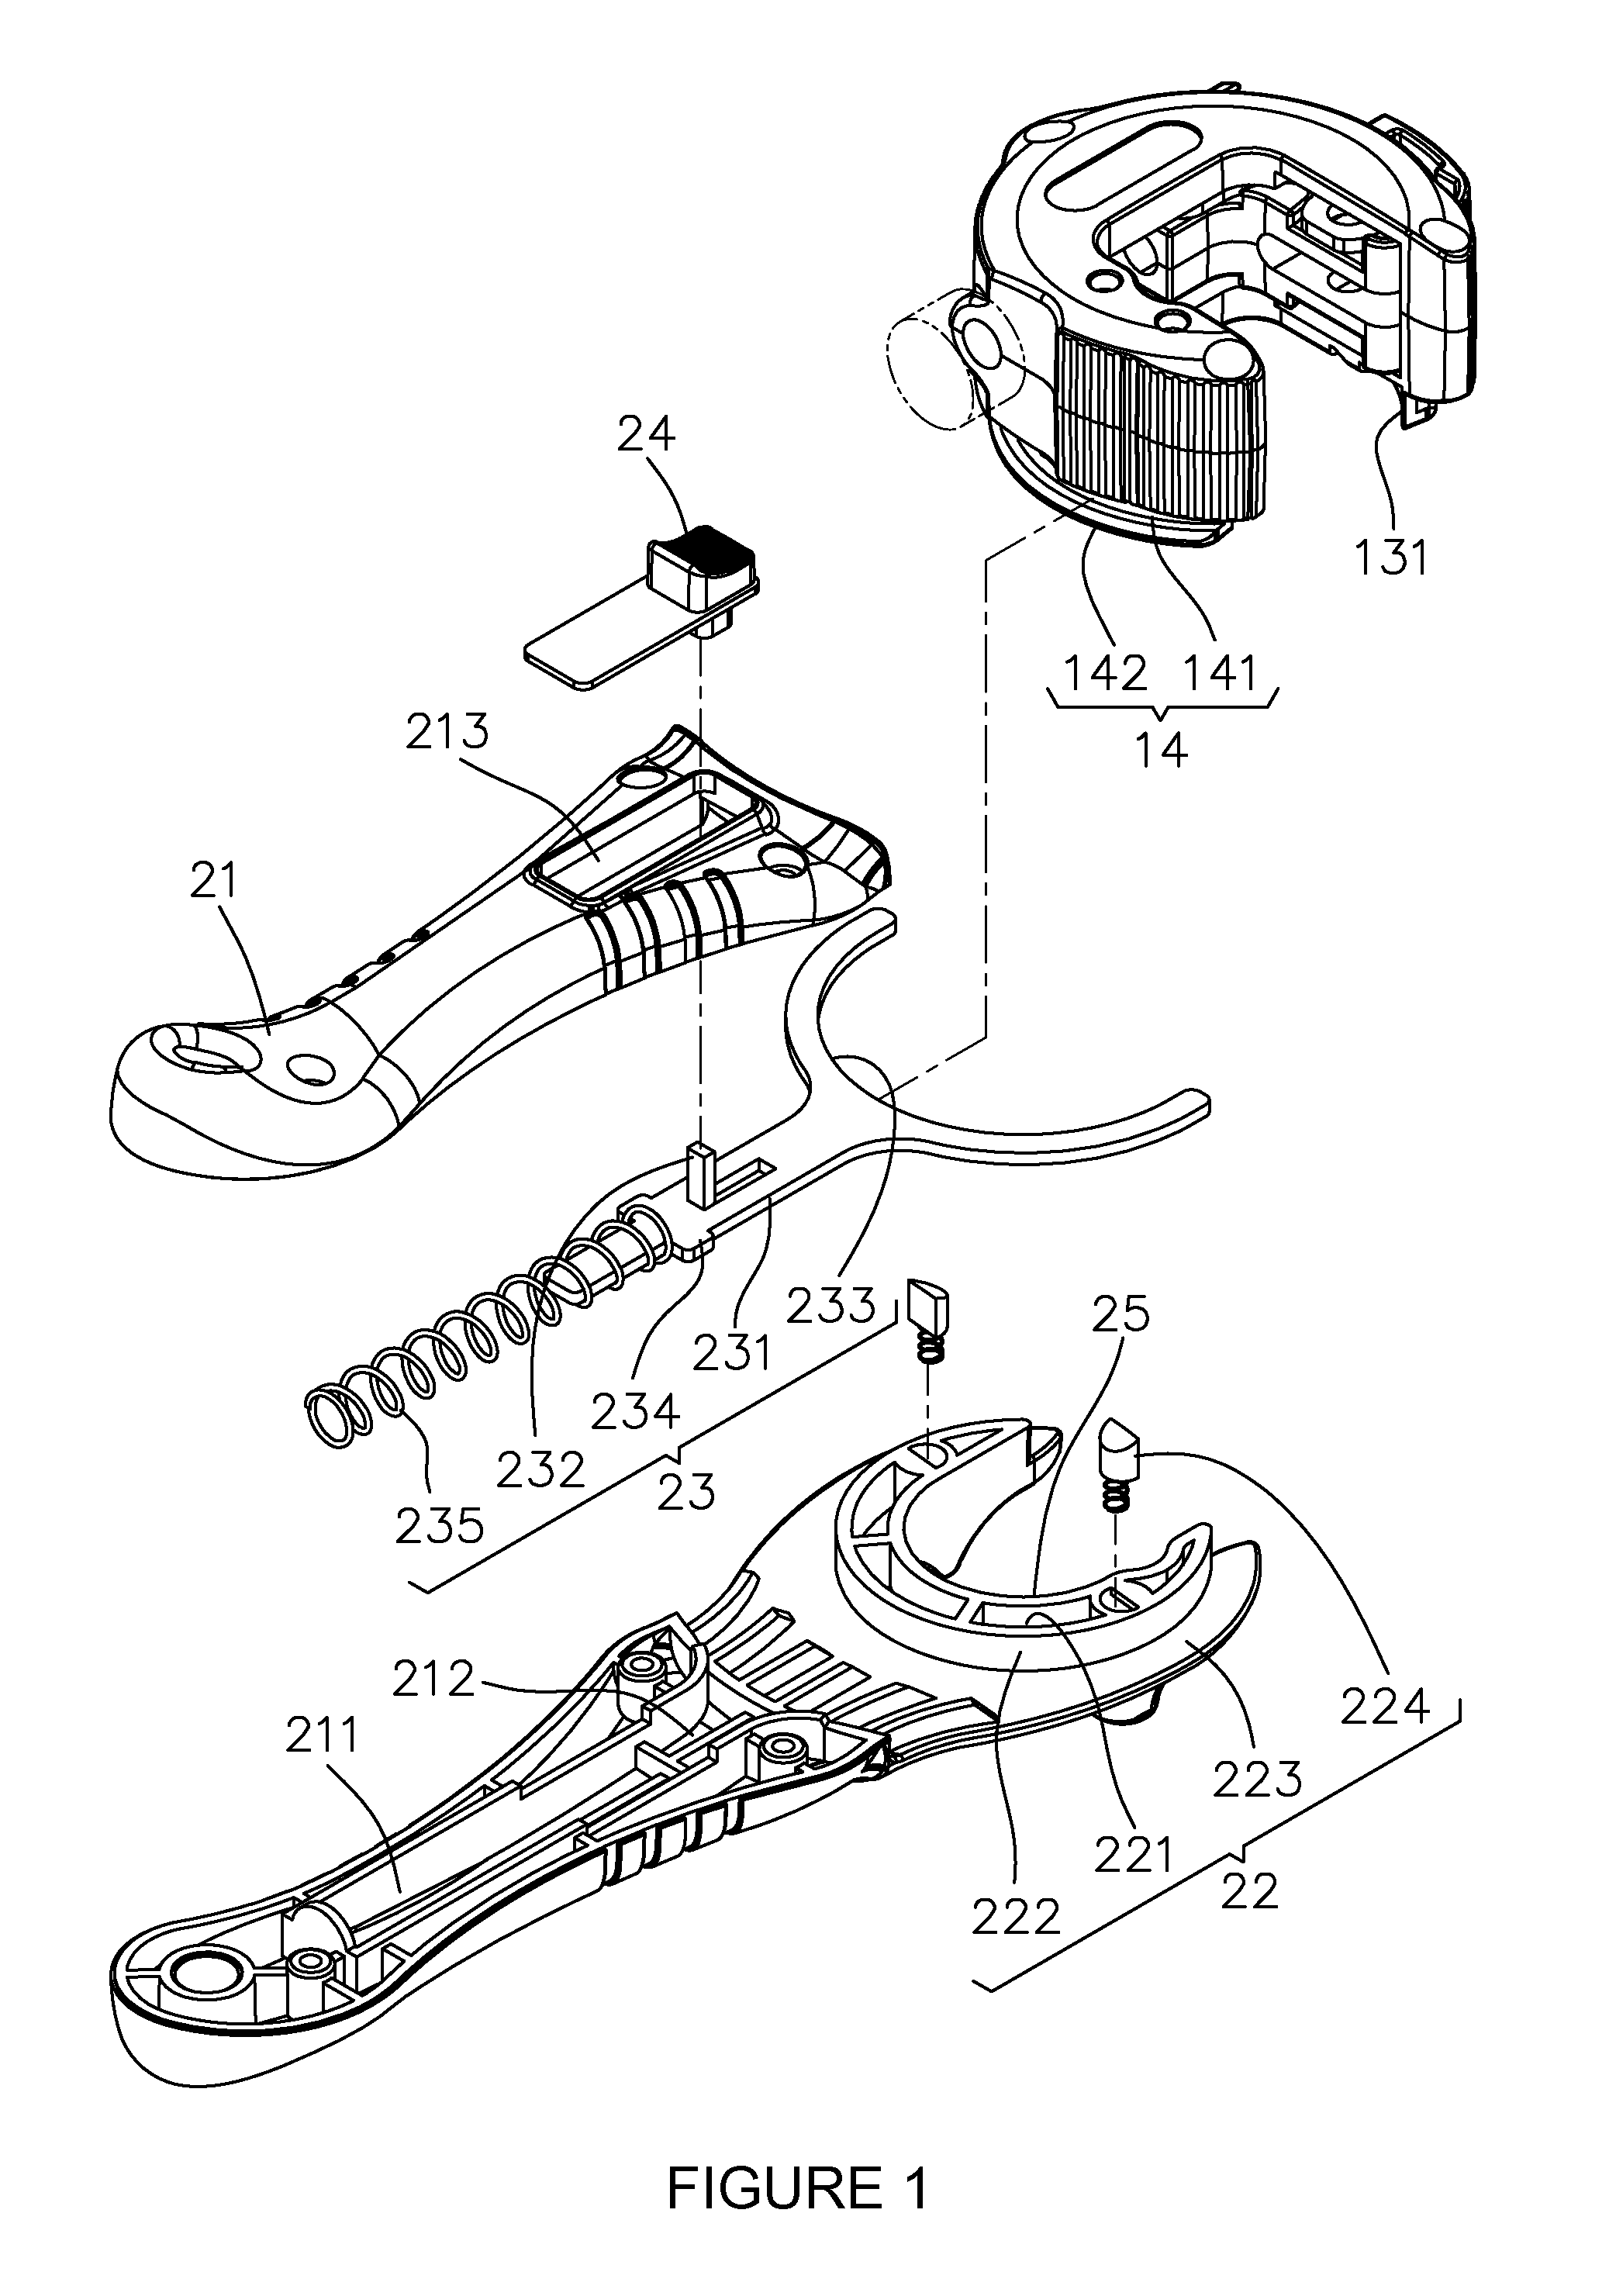 Tube cutting device with rapid separable handle